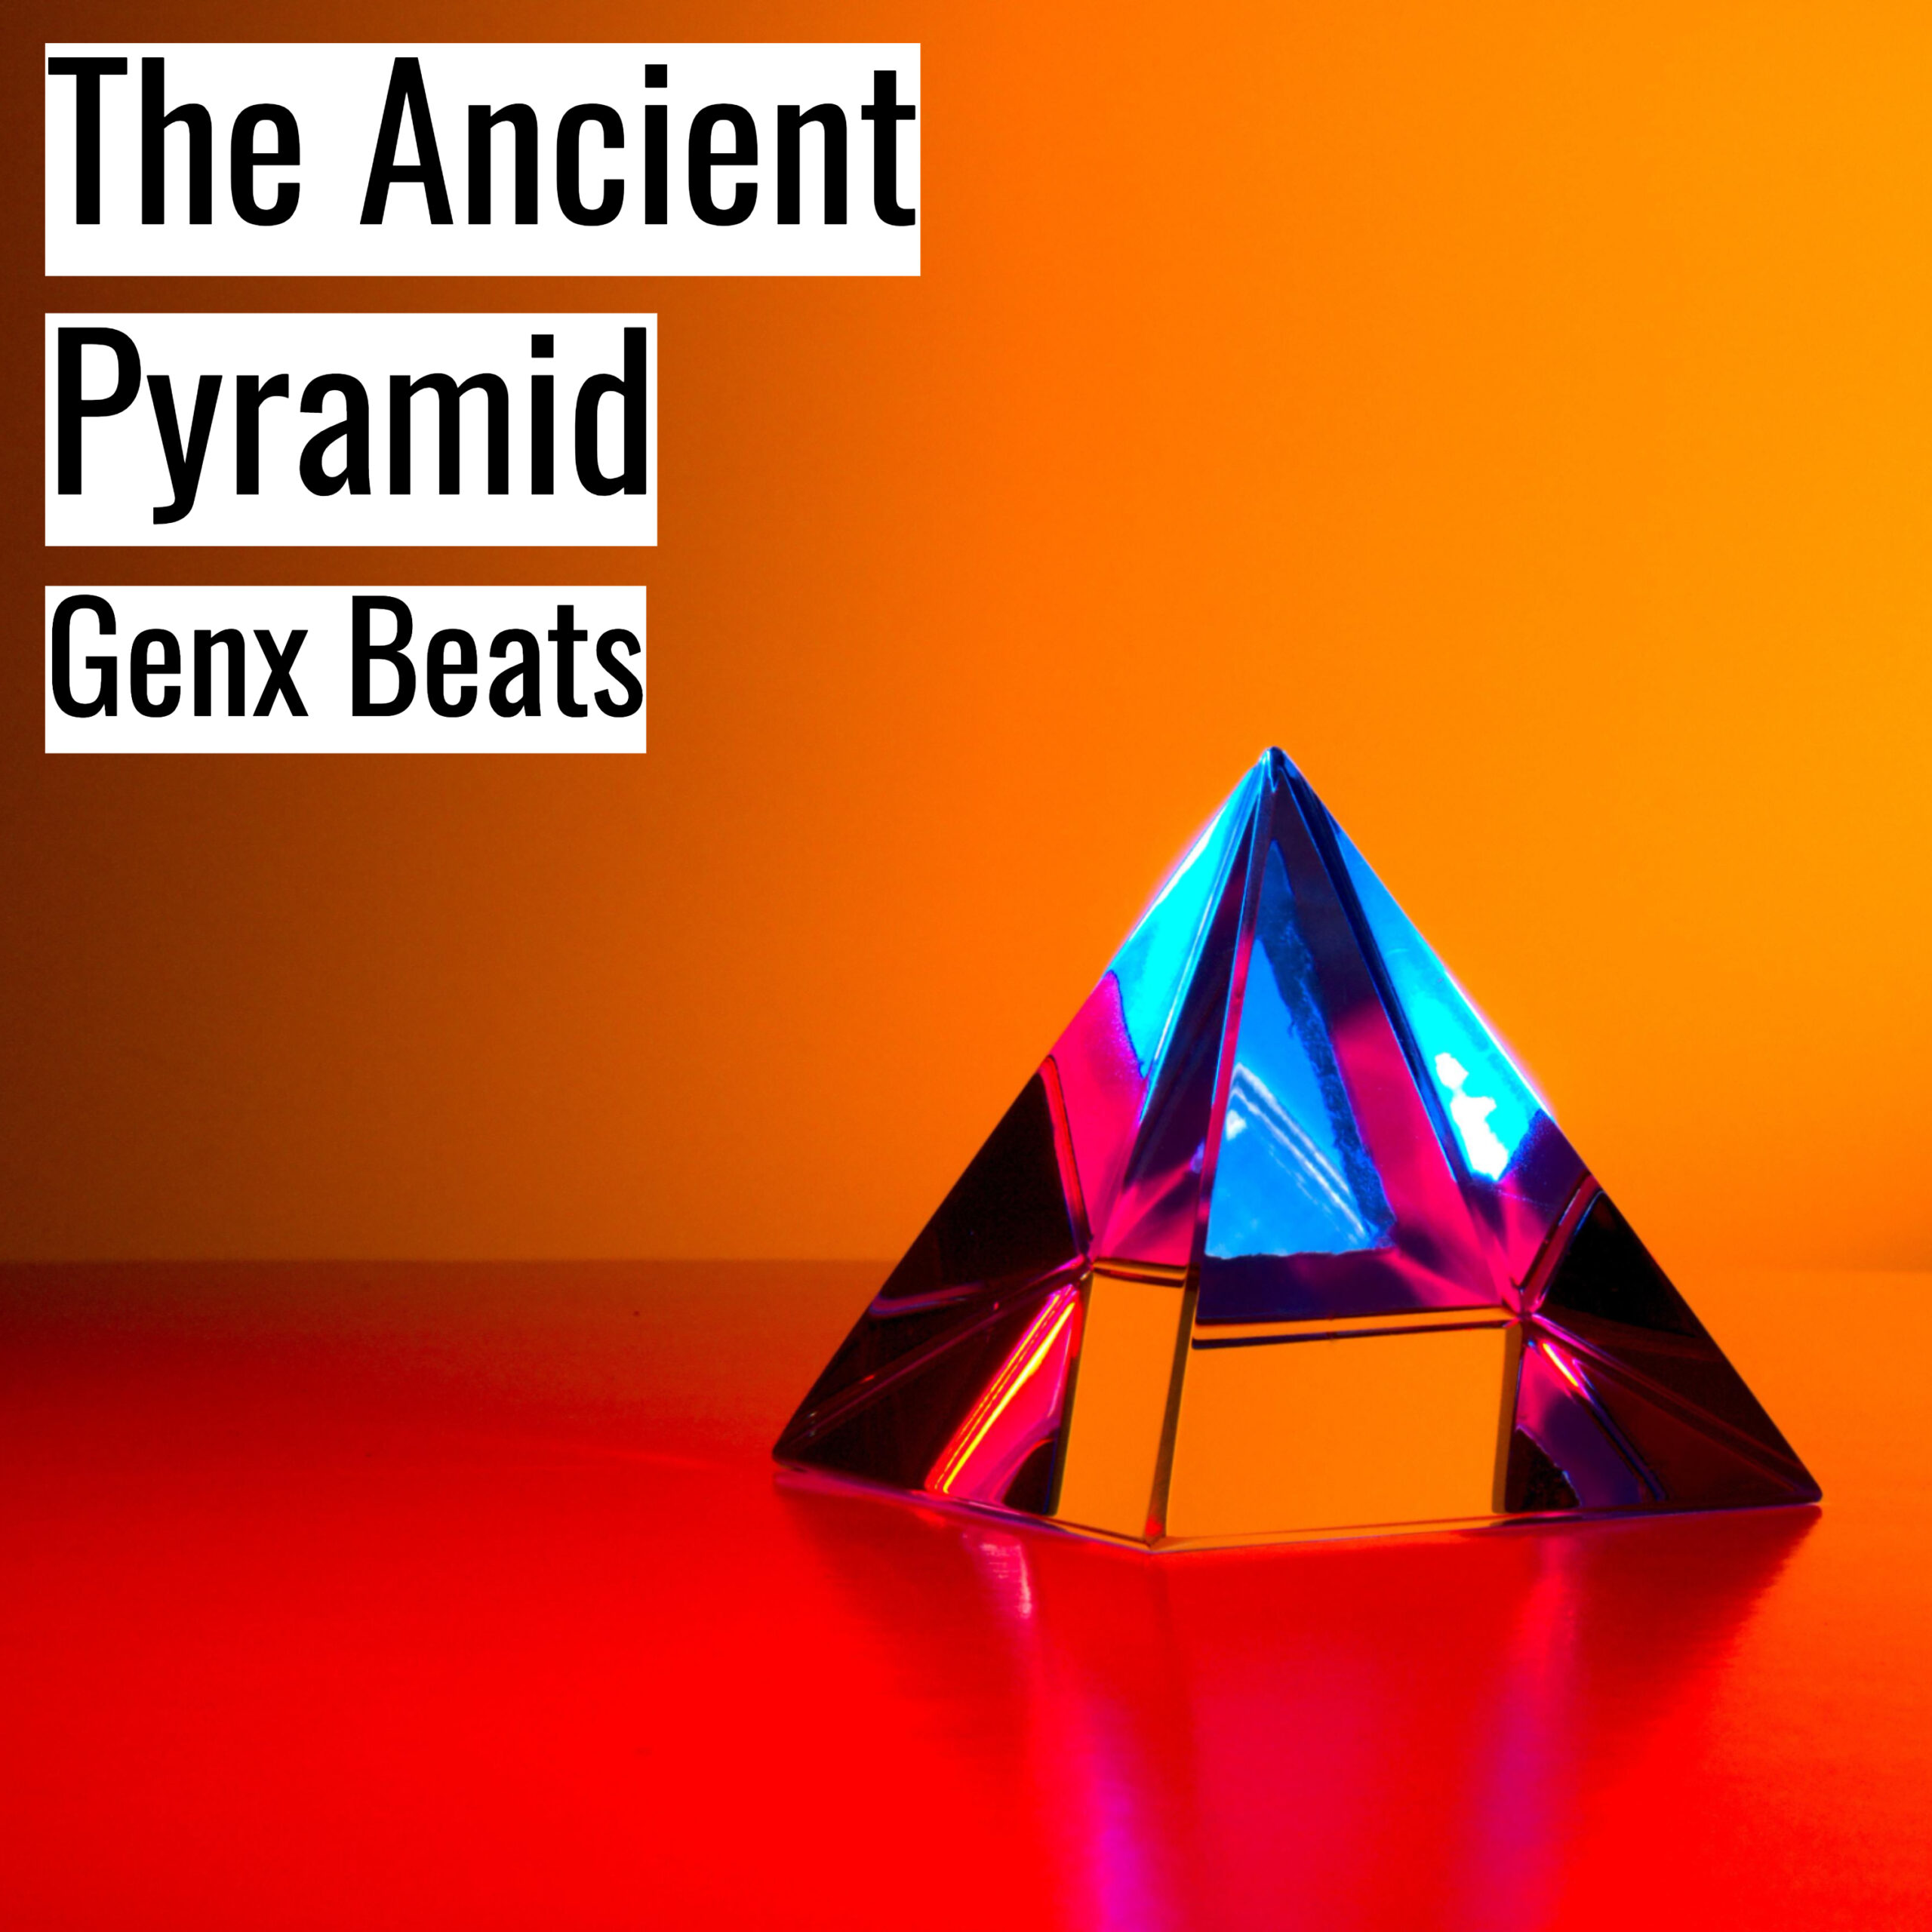 The Ancient Pyramid scaled